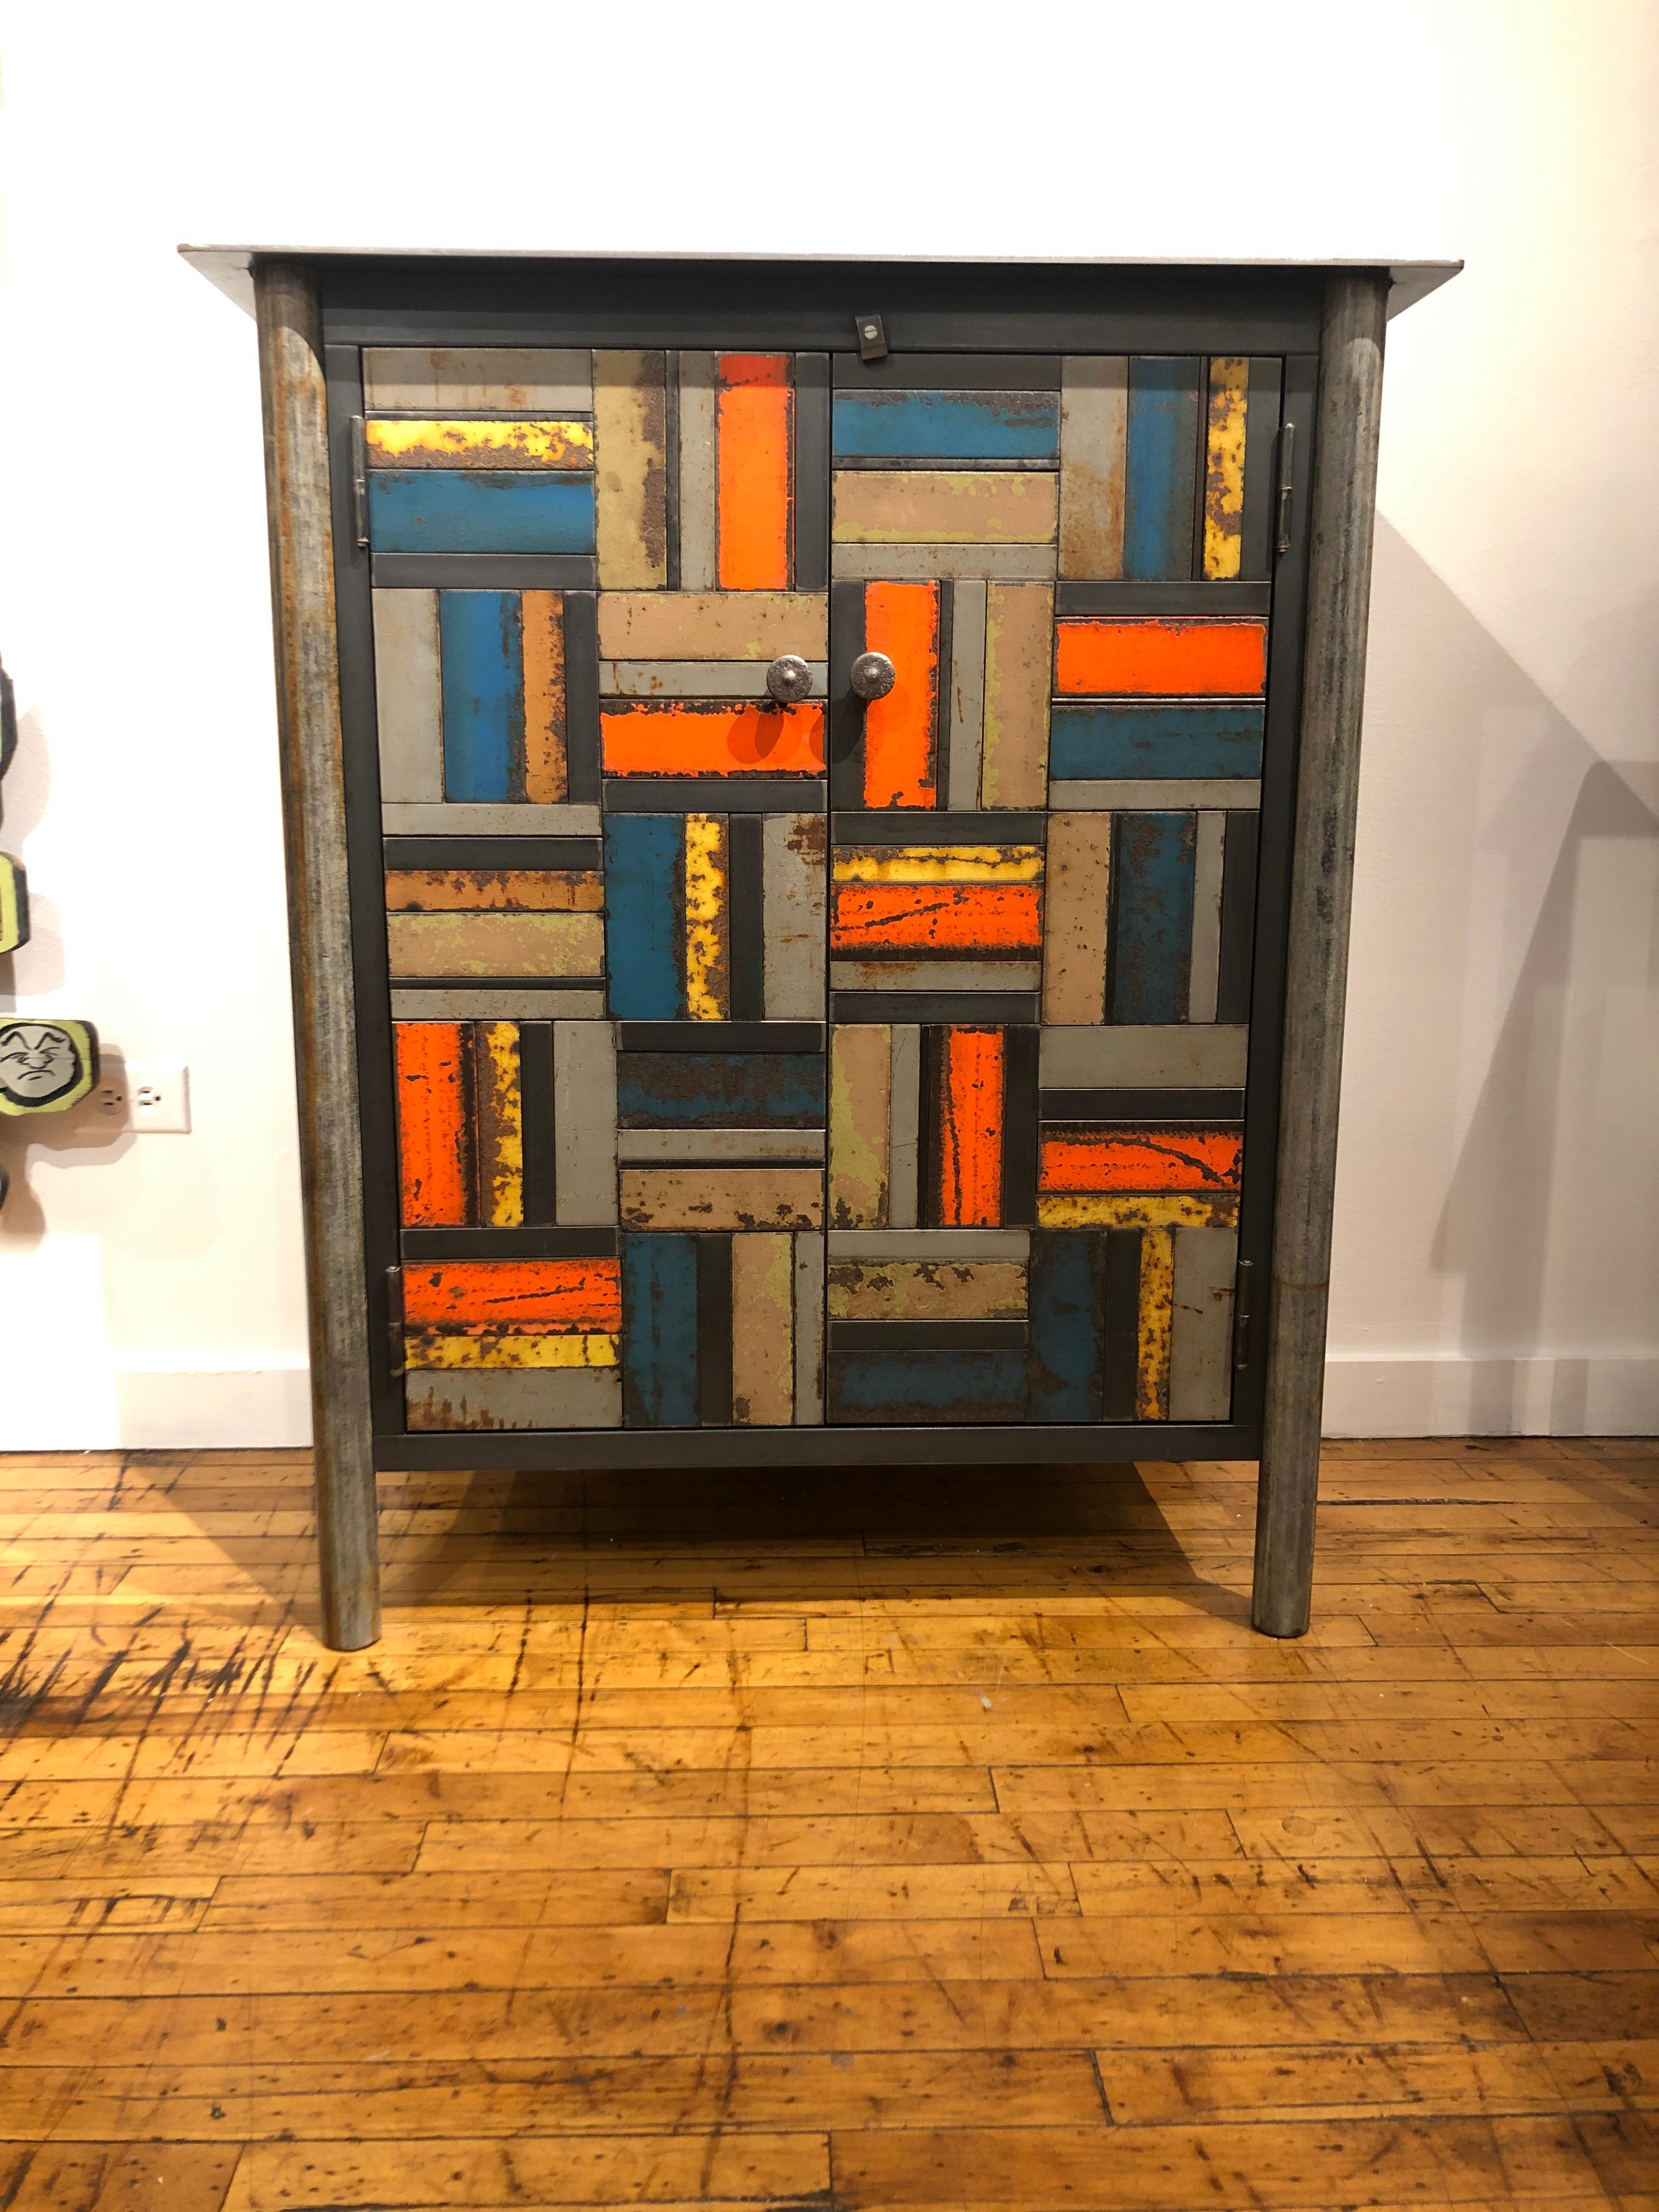 This is a totally functional two-door cupboard. It is created from hot rolled steel and found steel. The legs are made from salvaged pipe. The panels on the door fronts and sides are made from salvaged pieces of steel with the original paint and